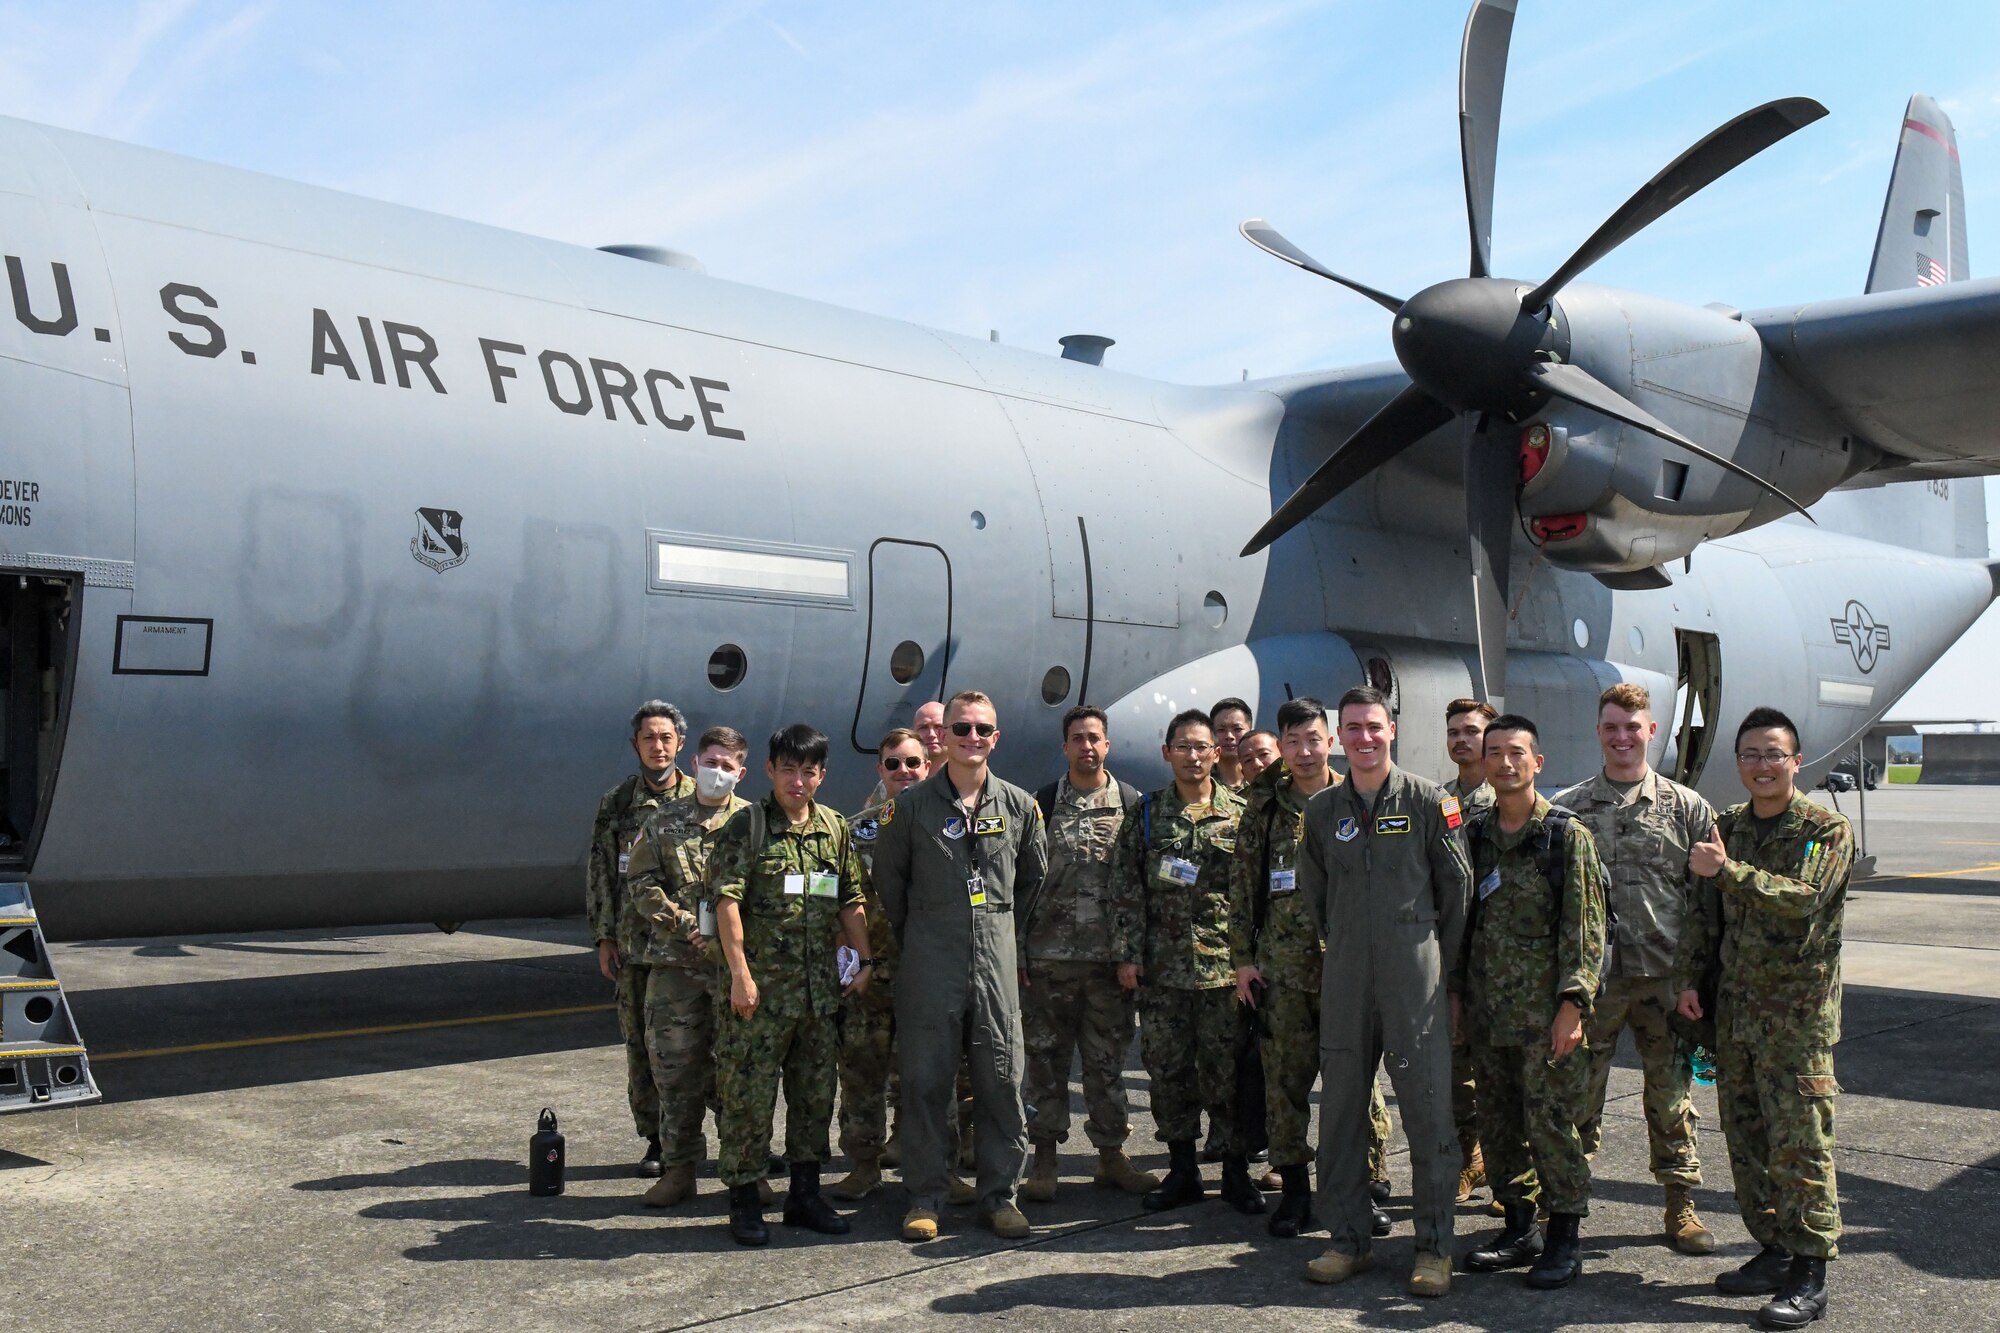 Members of the Japan Ground Self-Defense Force along with U.S. Army Soldiers from Camp Zama, Japan, and 374th Operations Group pilots gather for a group photo after completing a tour of a C-130J Super Hercules, at Yokota Air Base, Japan, Aug. 9, 2022. This group visited Yokota, as part of a six-week cooperative work program. This program is an opportunity for JGSDF and U.S. Army service members to improve bilateral relations, enhance language comprehension skills, learn about each others cultures and familiarize themselves with bilateral military doctrine and techniques. (U.S. Air Force photo by Tech. Sgt. Garrett Cole)